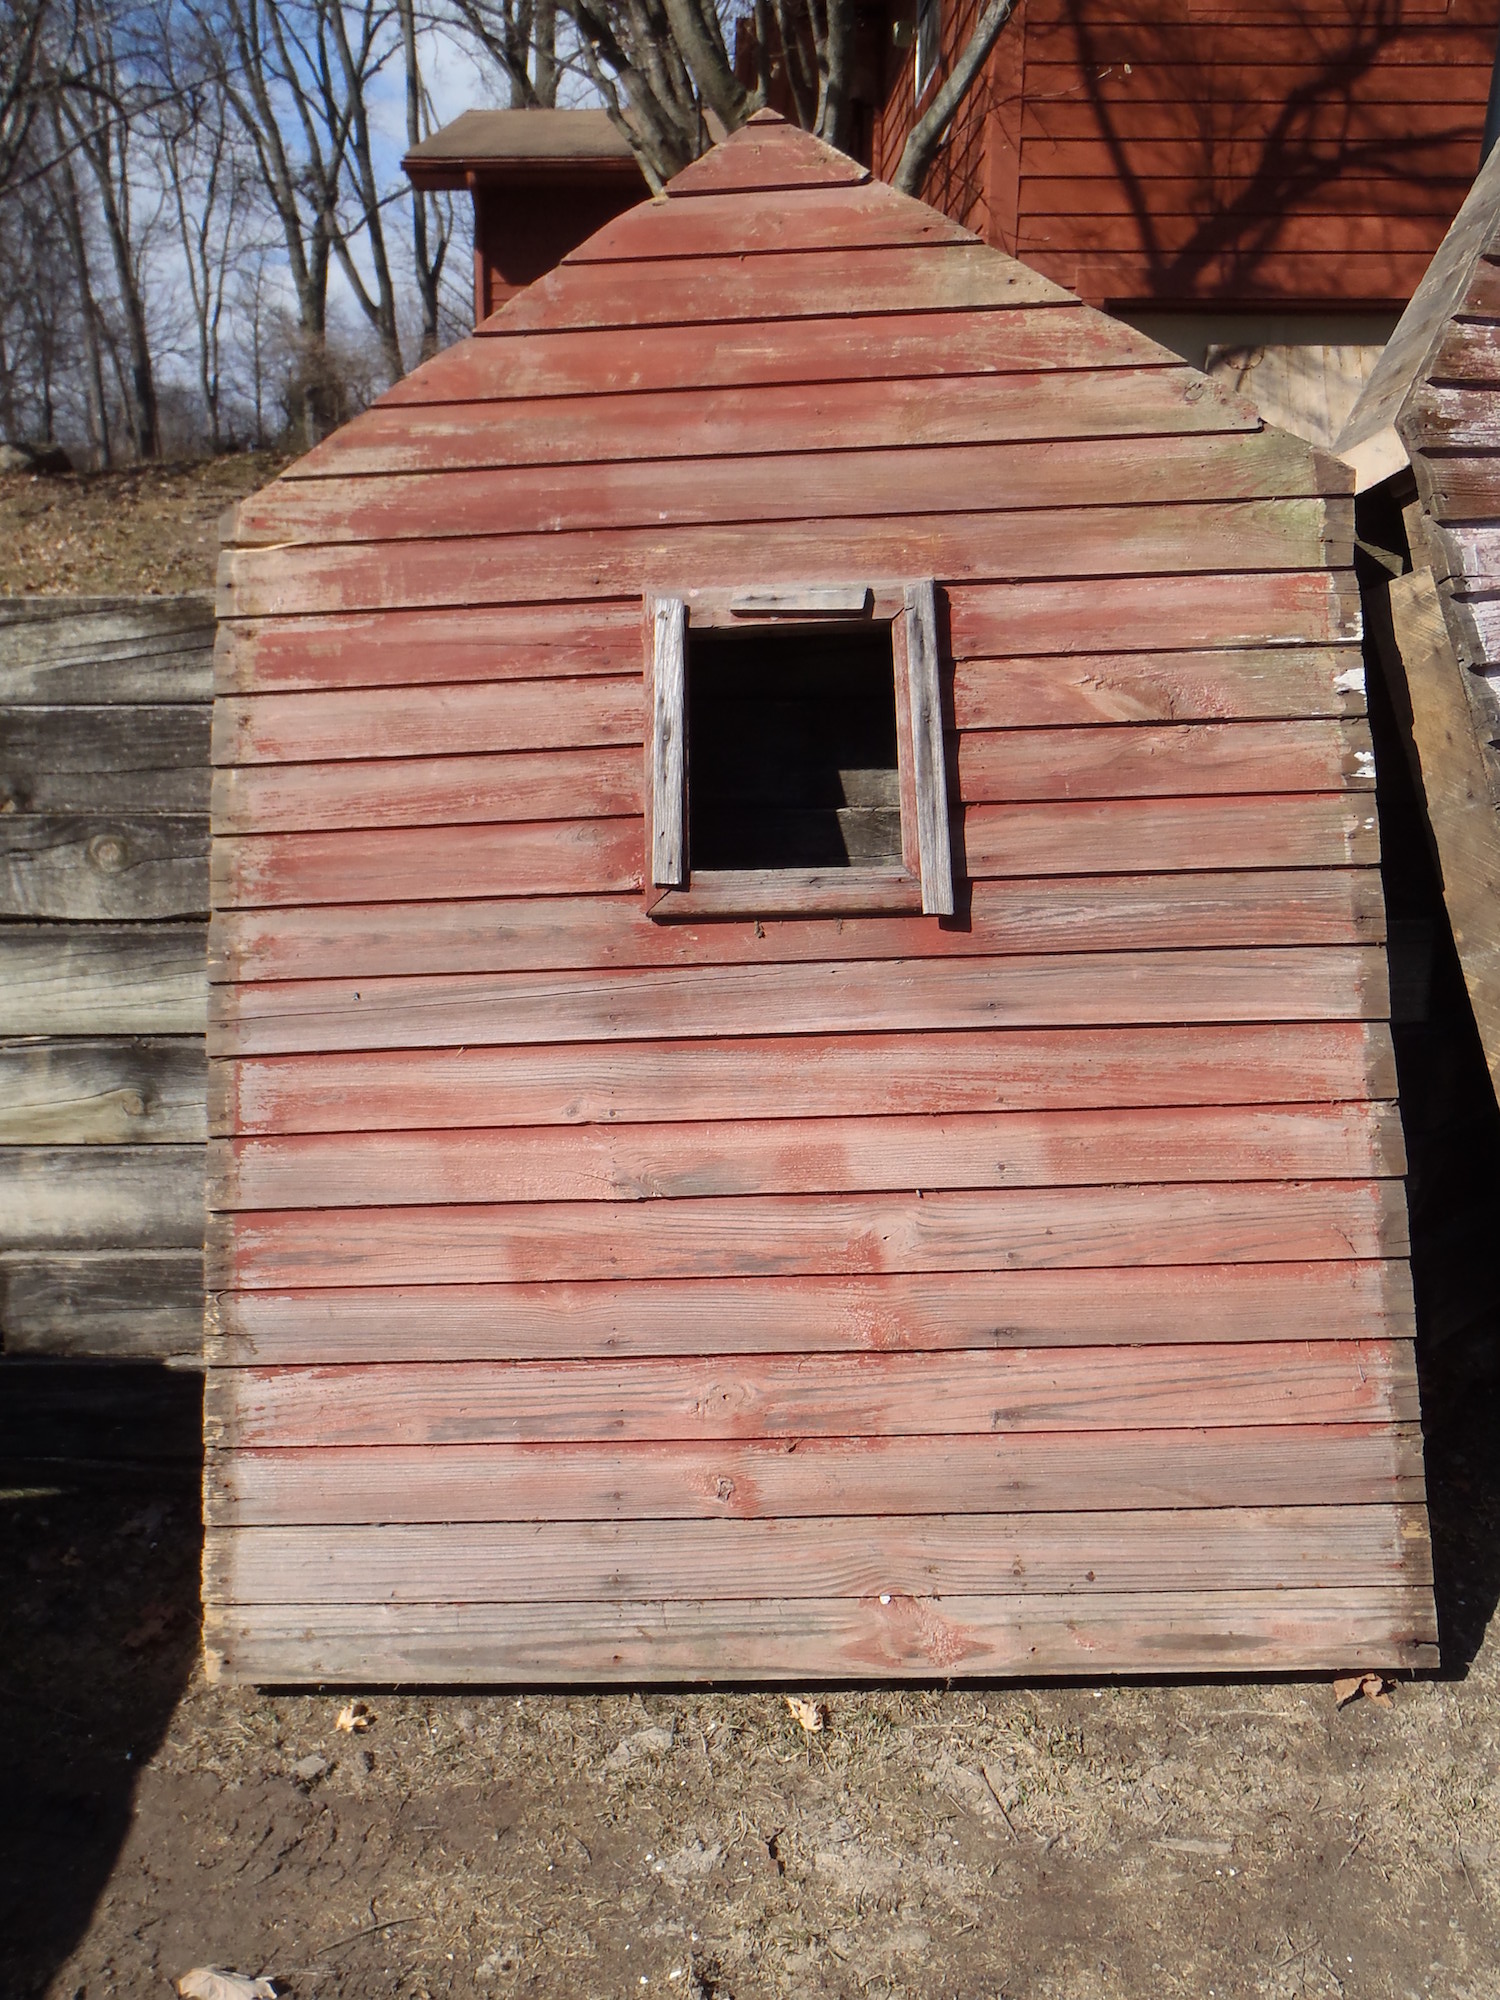 One wall of an outbuilding that was recovered from a barn demolition site